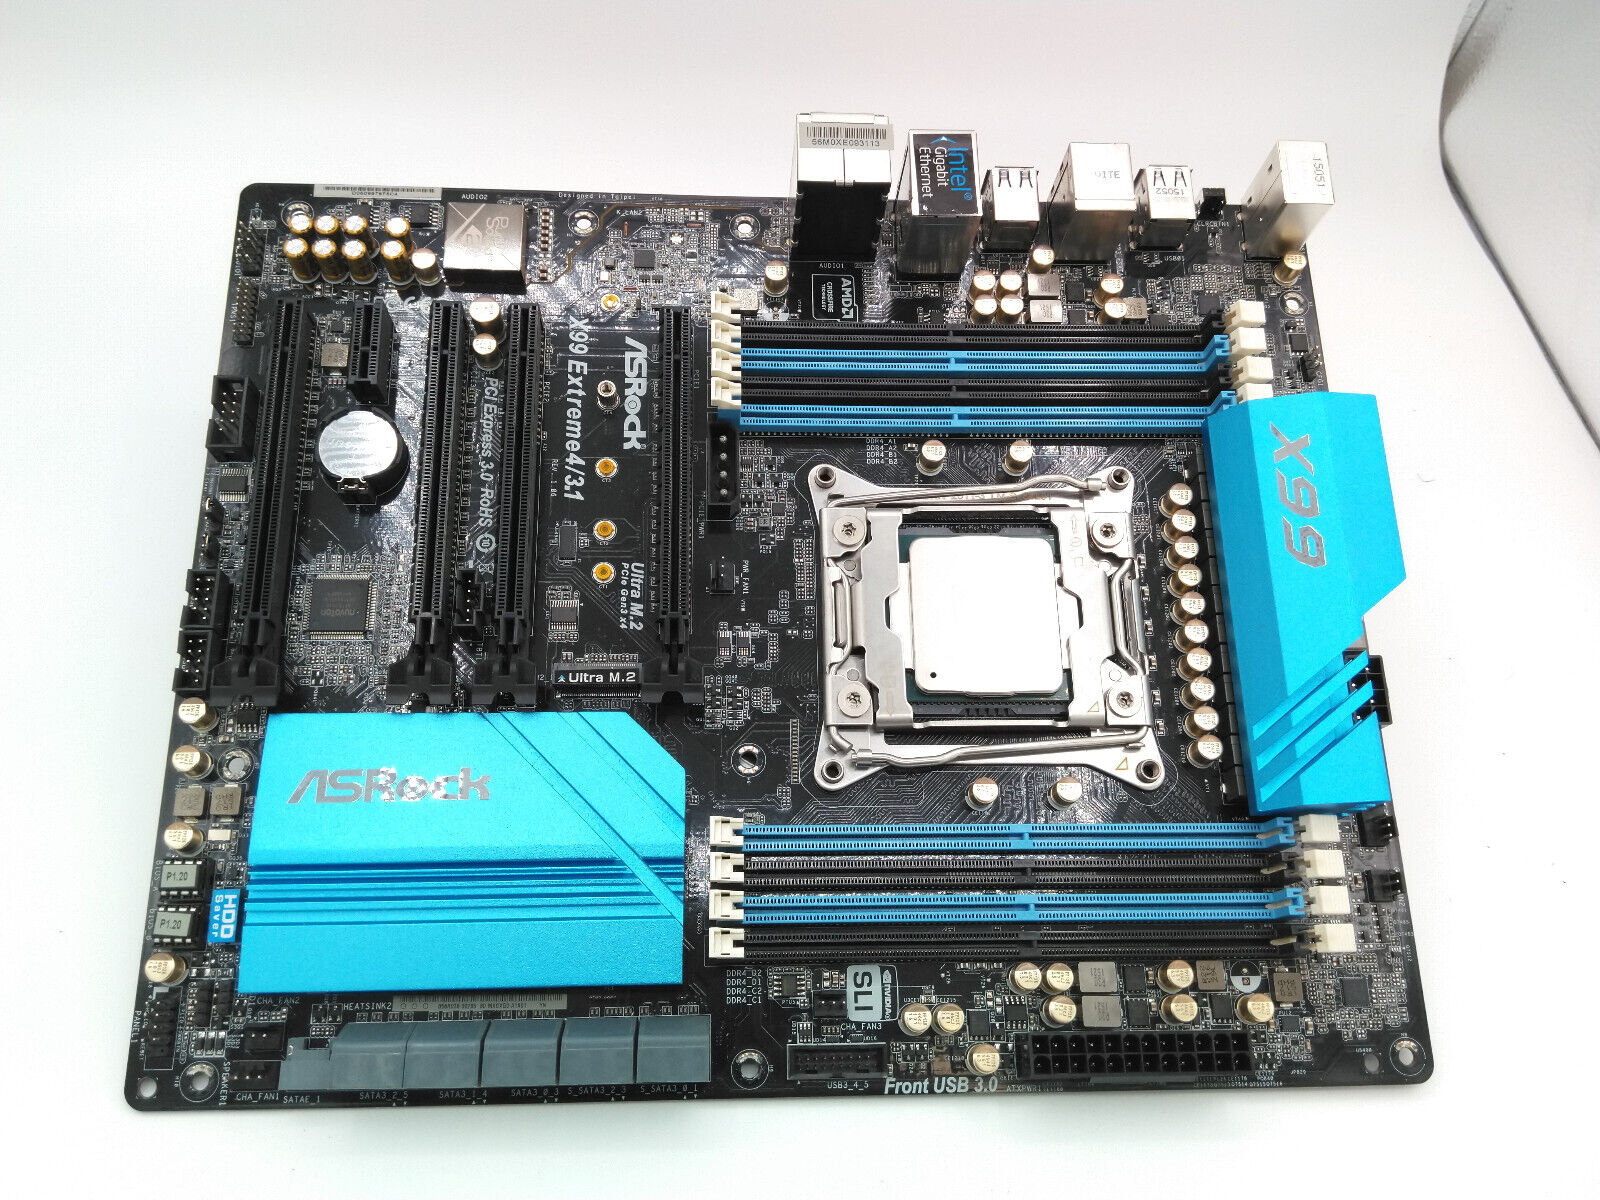 ASROCK Gaming Motherboard X99 EXTREME4/3.1 with Intel i7-5820K @ 3.3 GHZ